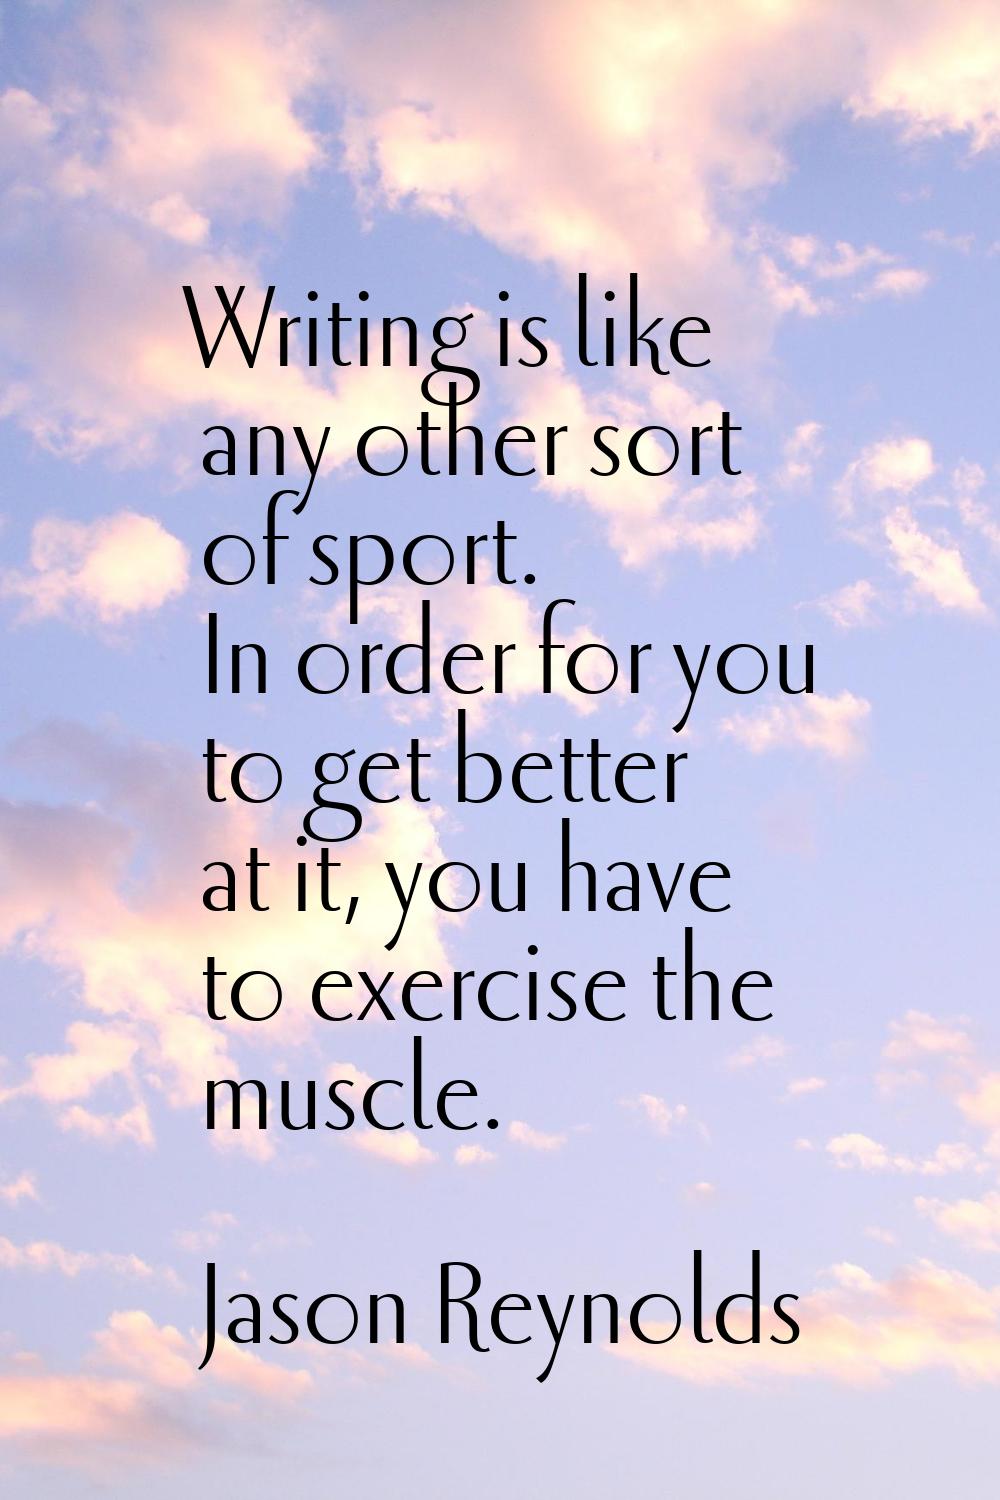 Writing is like any other sort of sport. In order for you to get better at it, you have to exercise